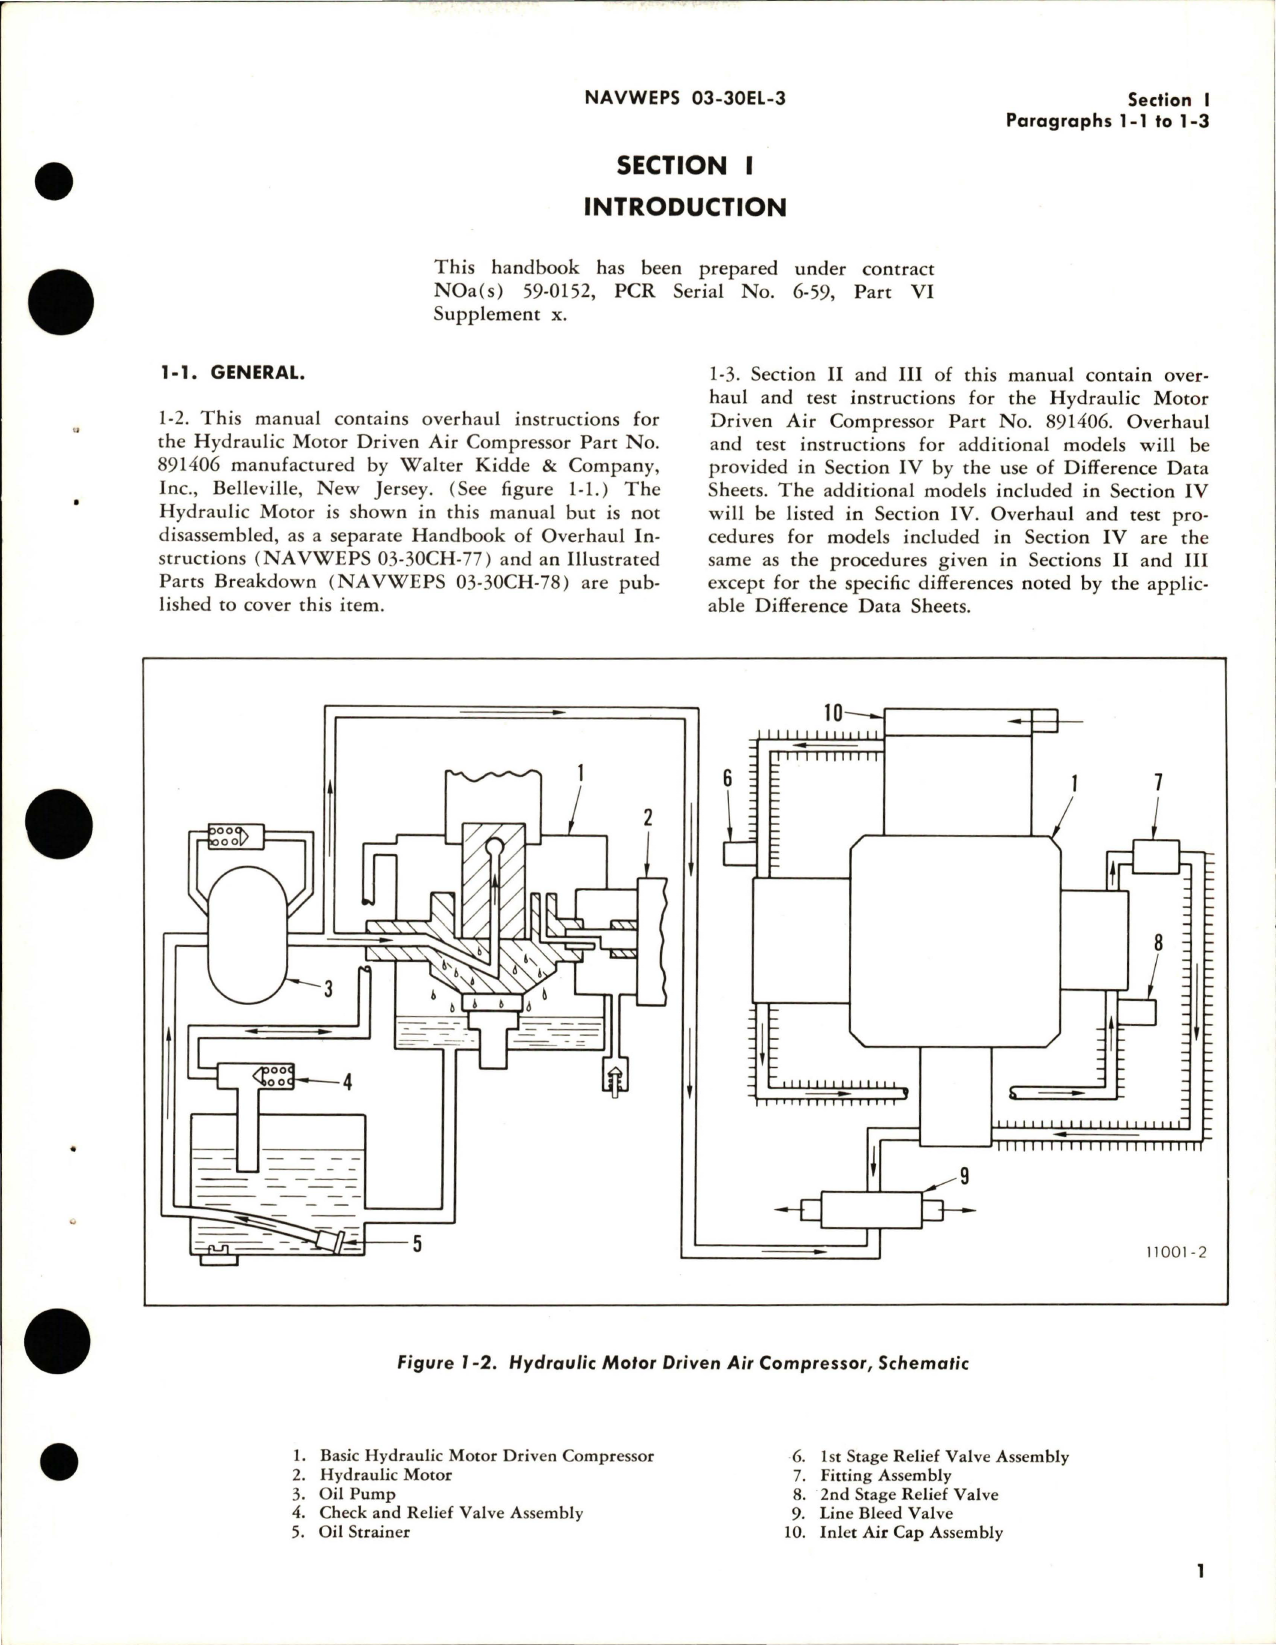 Sample page 5 from AirCorps Library document: Overhaul Instructions for Hydraulic Motor Driven Air Compressor - 891406